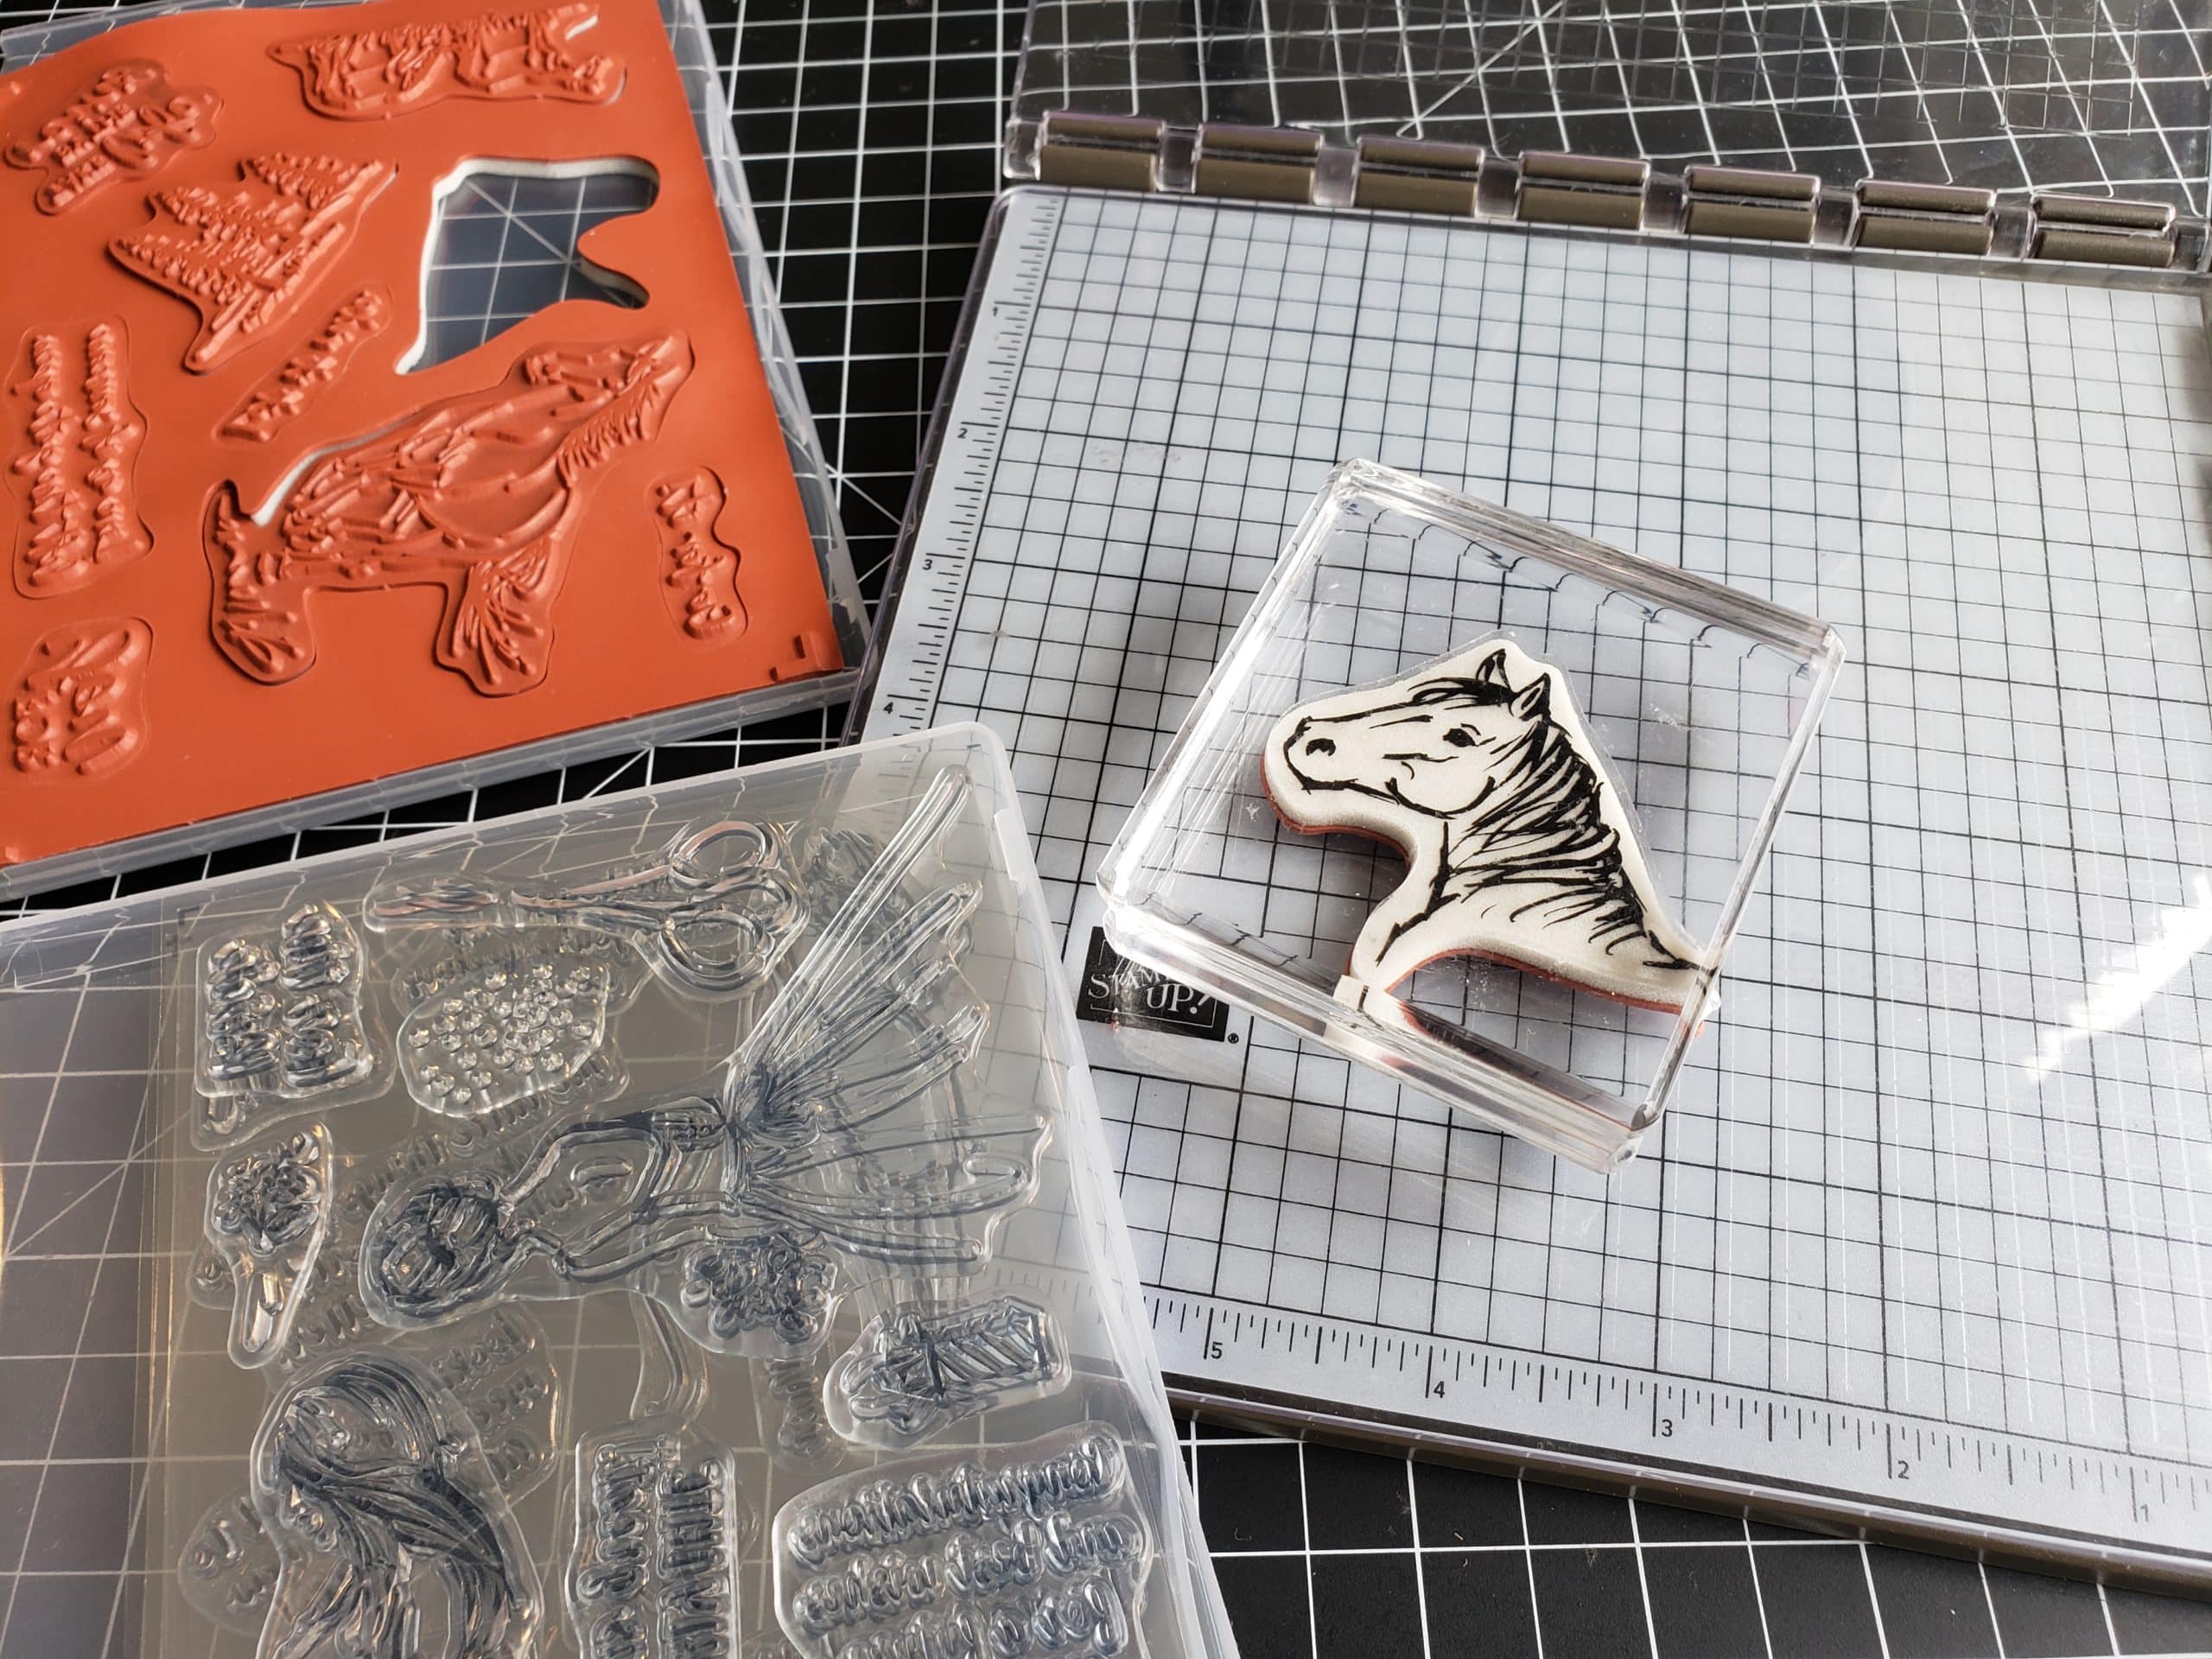 Learn To Make Handmade Cards #4 – All About Stamps